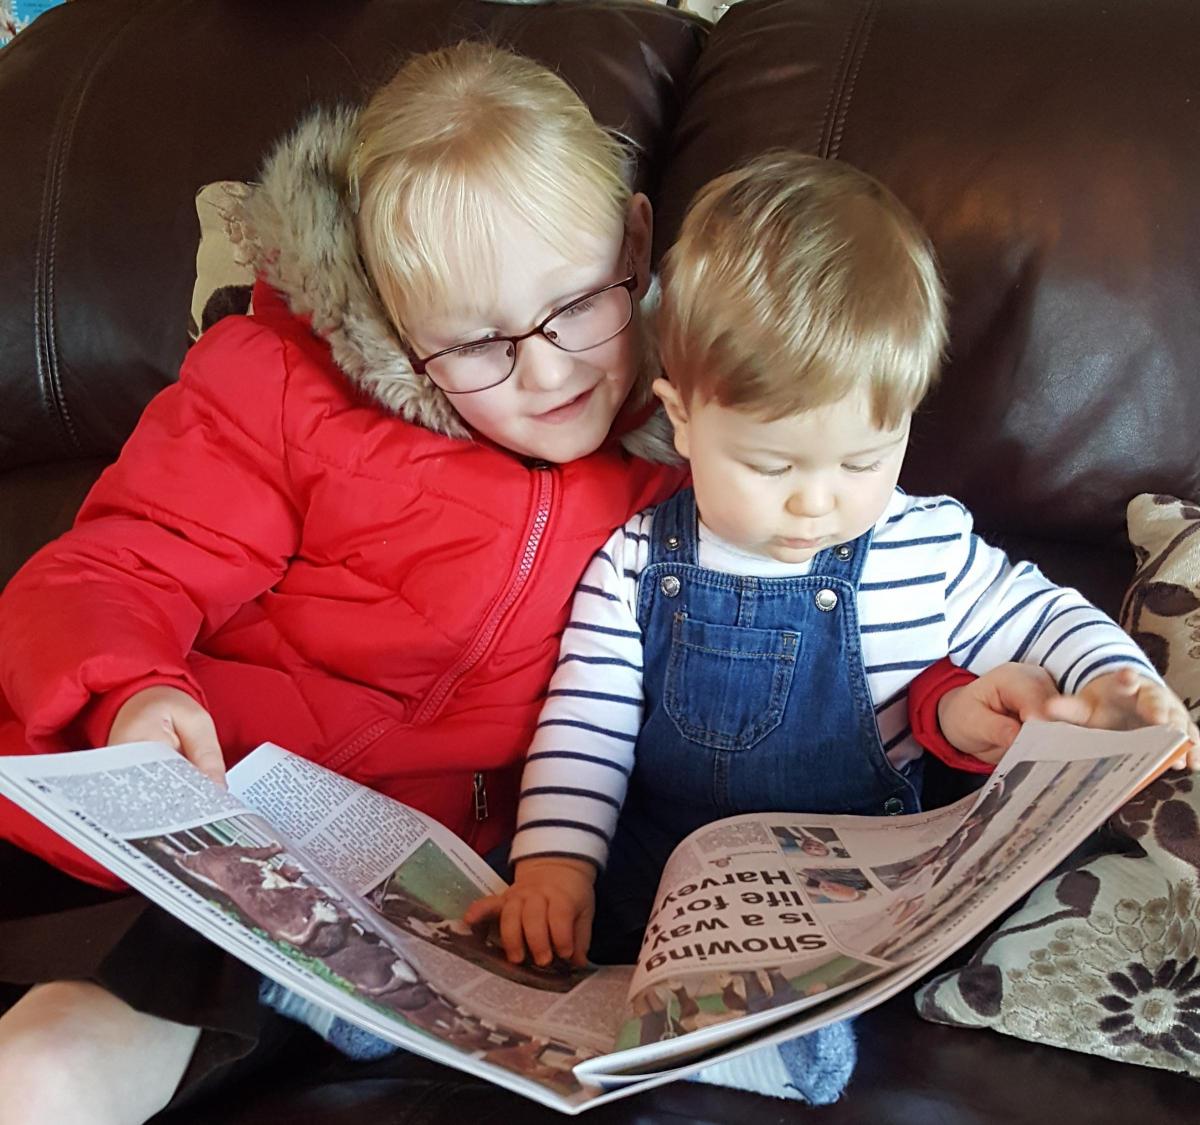 Basil Watt, aged 10 months, and Hannah Watt, aged six years take time to teach each other about Scotland's farming landscape, while at home in Tarboltin in South Ayrshire